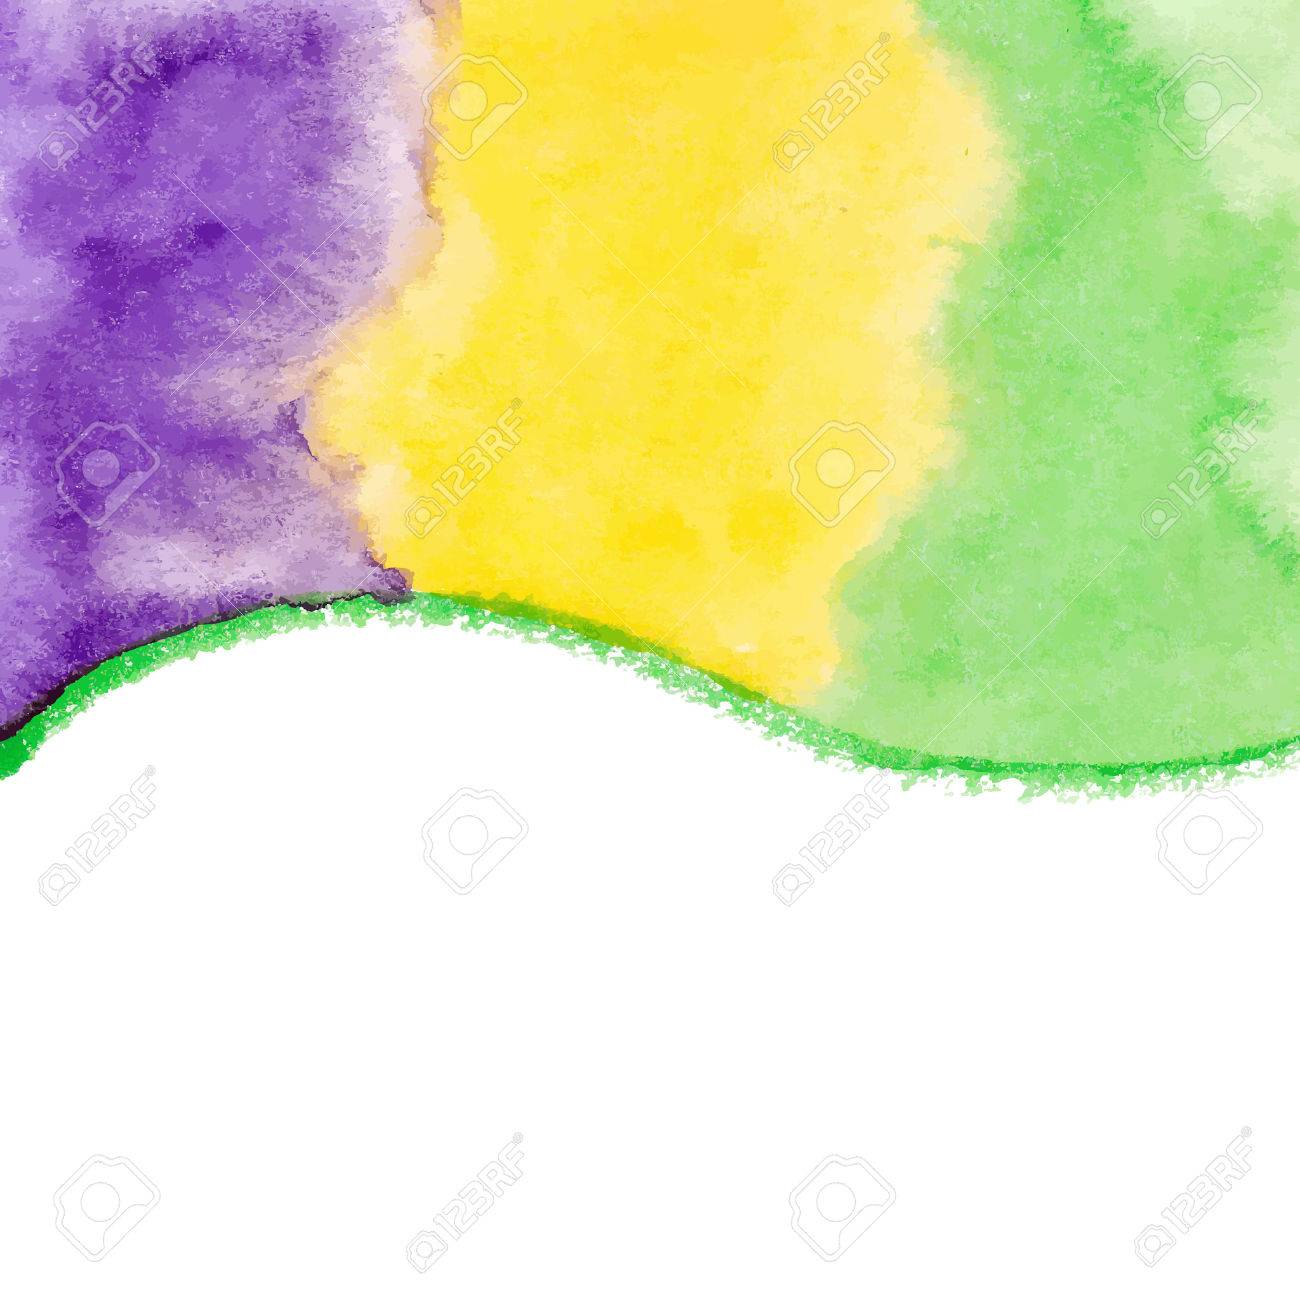 Watercolor Paint Vector Background For Mardi Gras Royalty